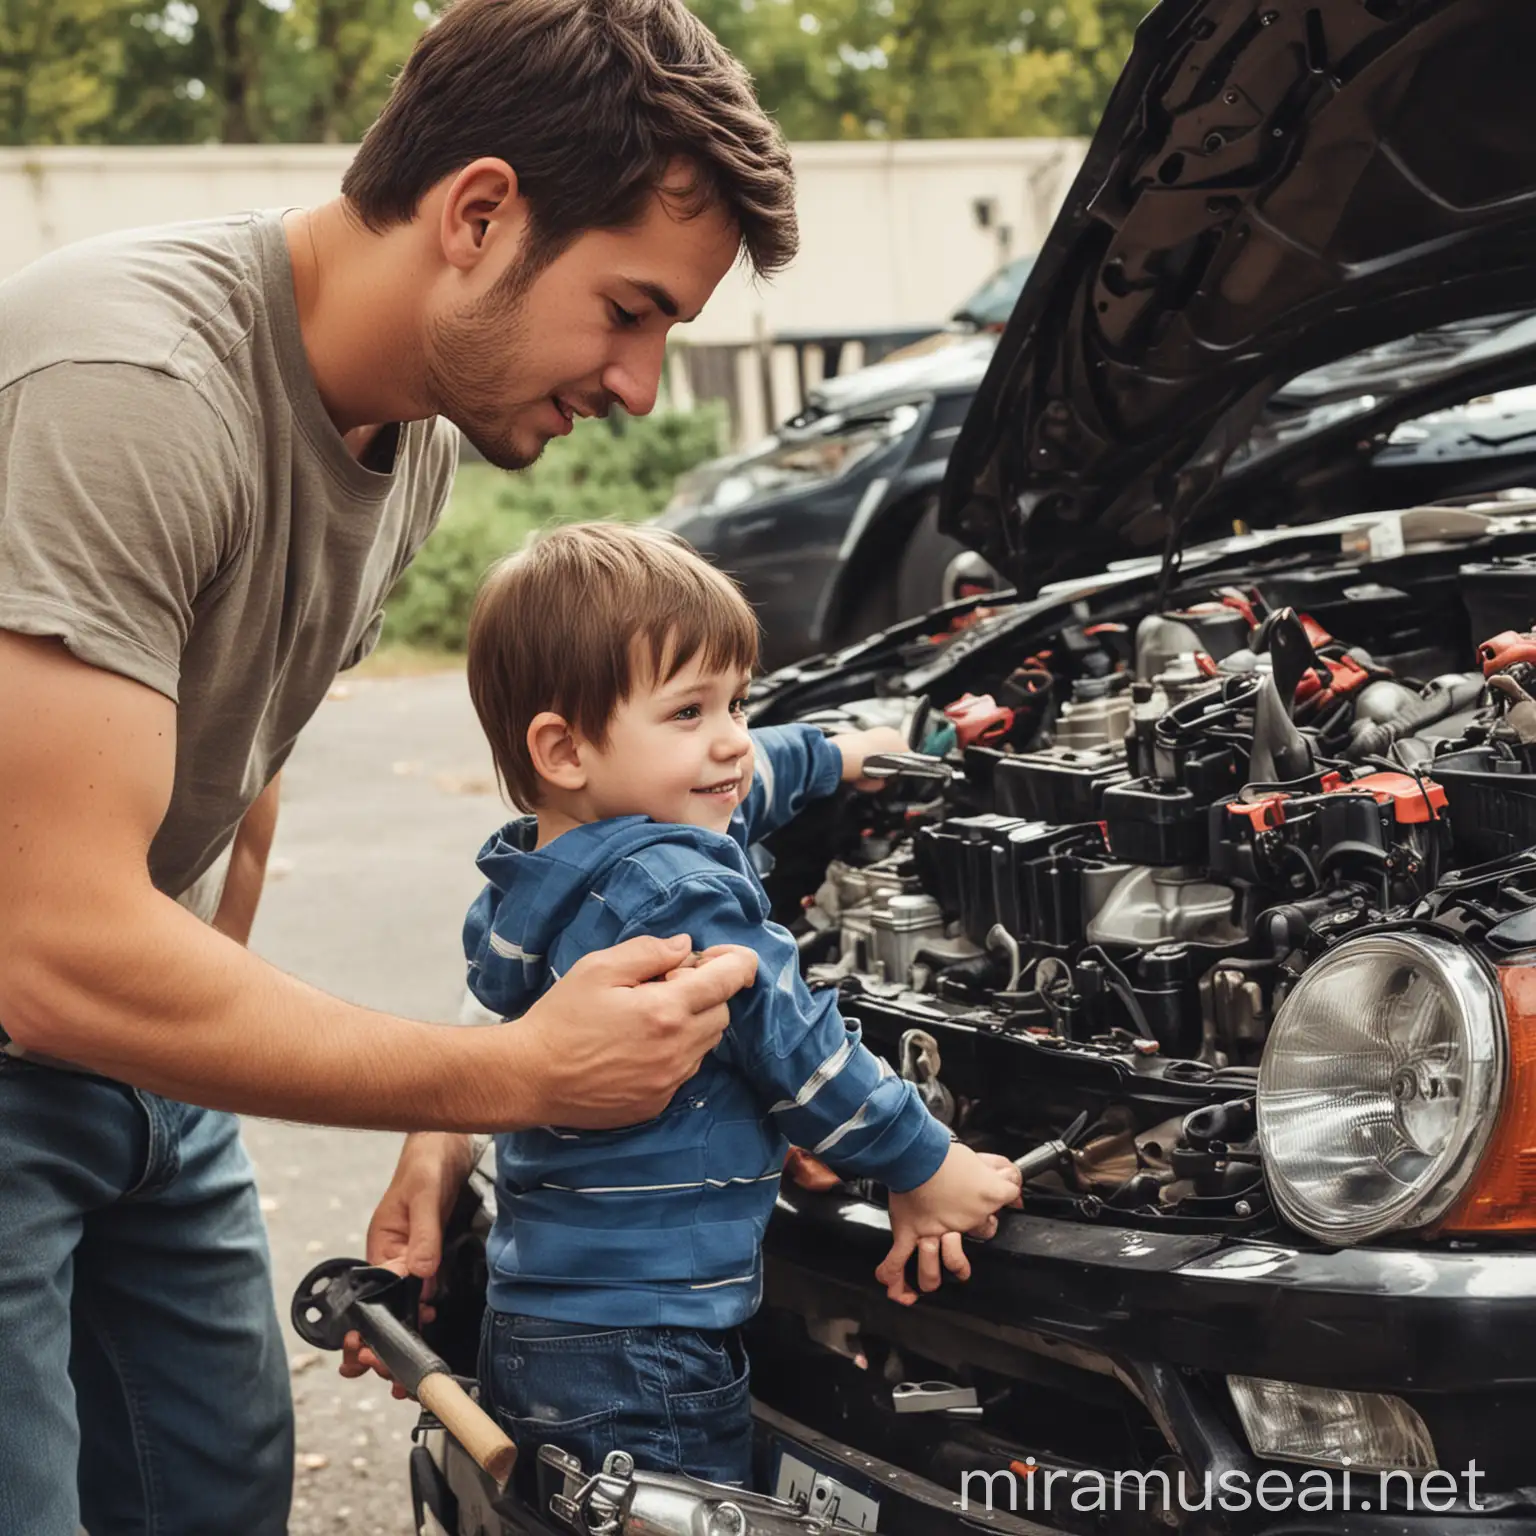 Father and Son Repairing Car Together Family Bonding Activity